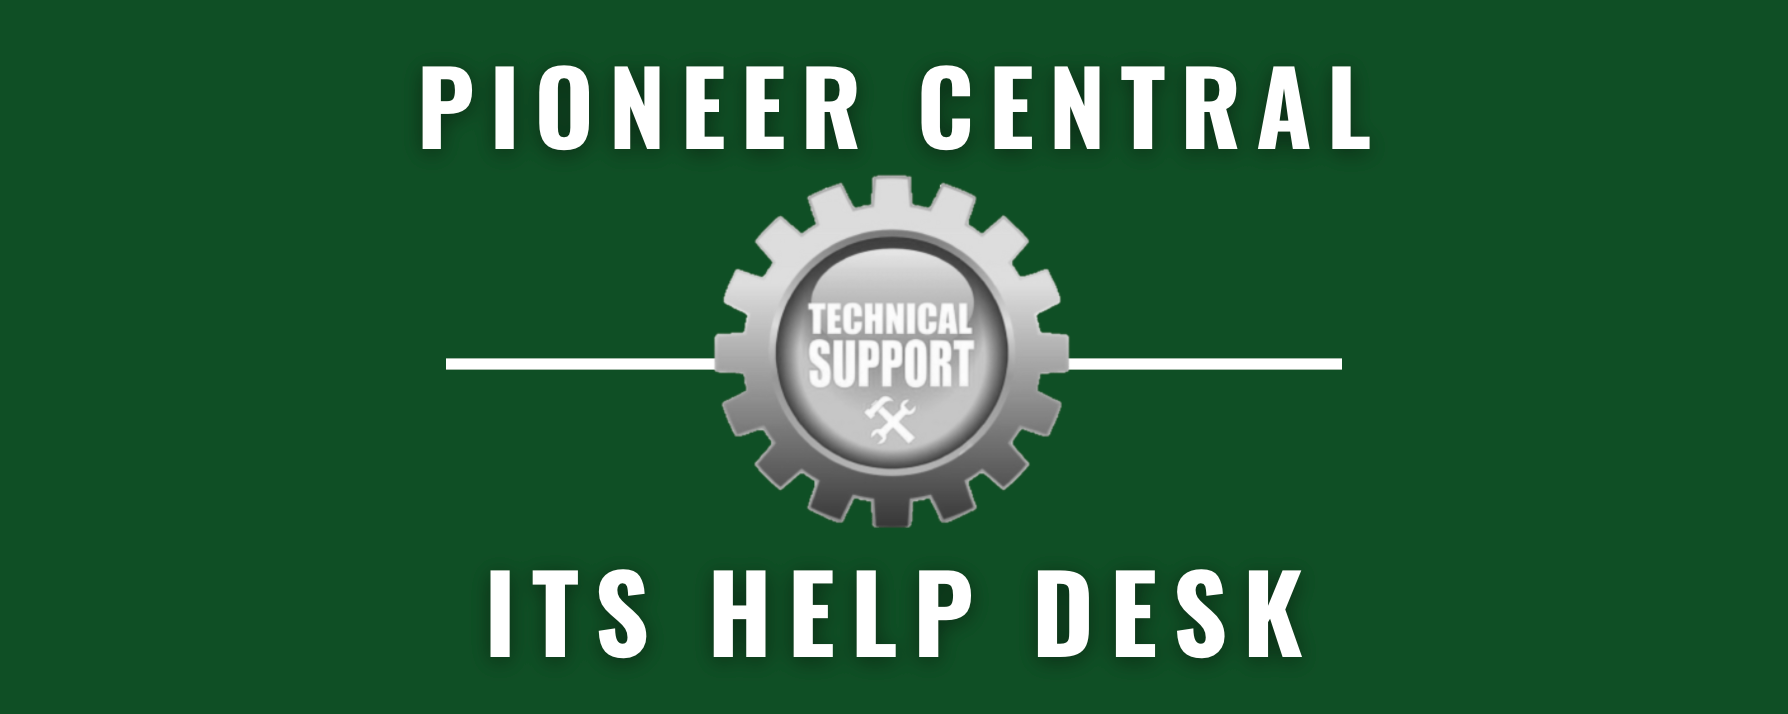 Pioneer Central Technical Support ITS Help Desk